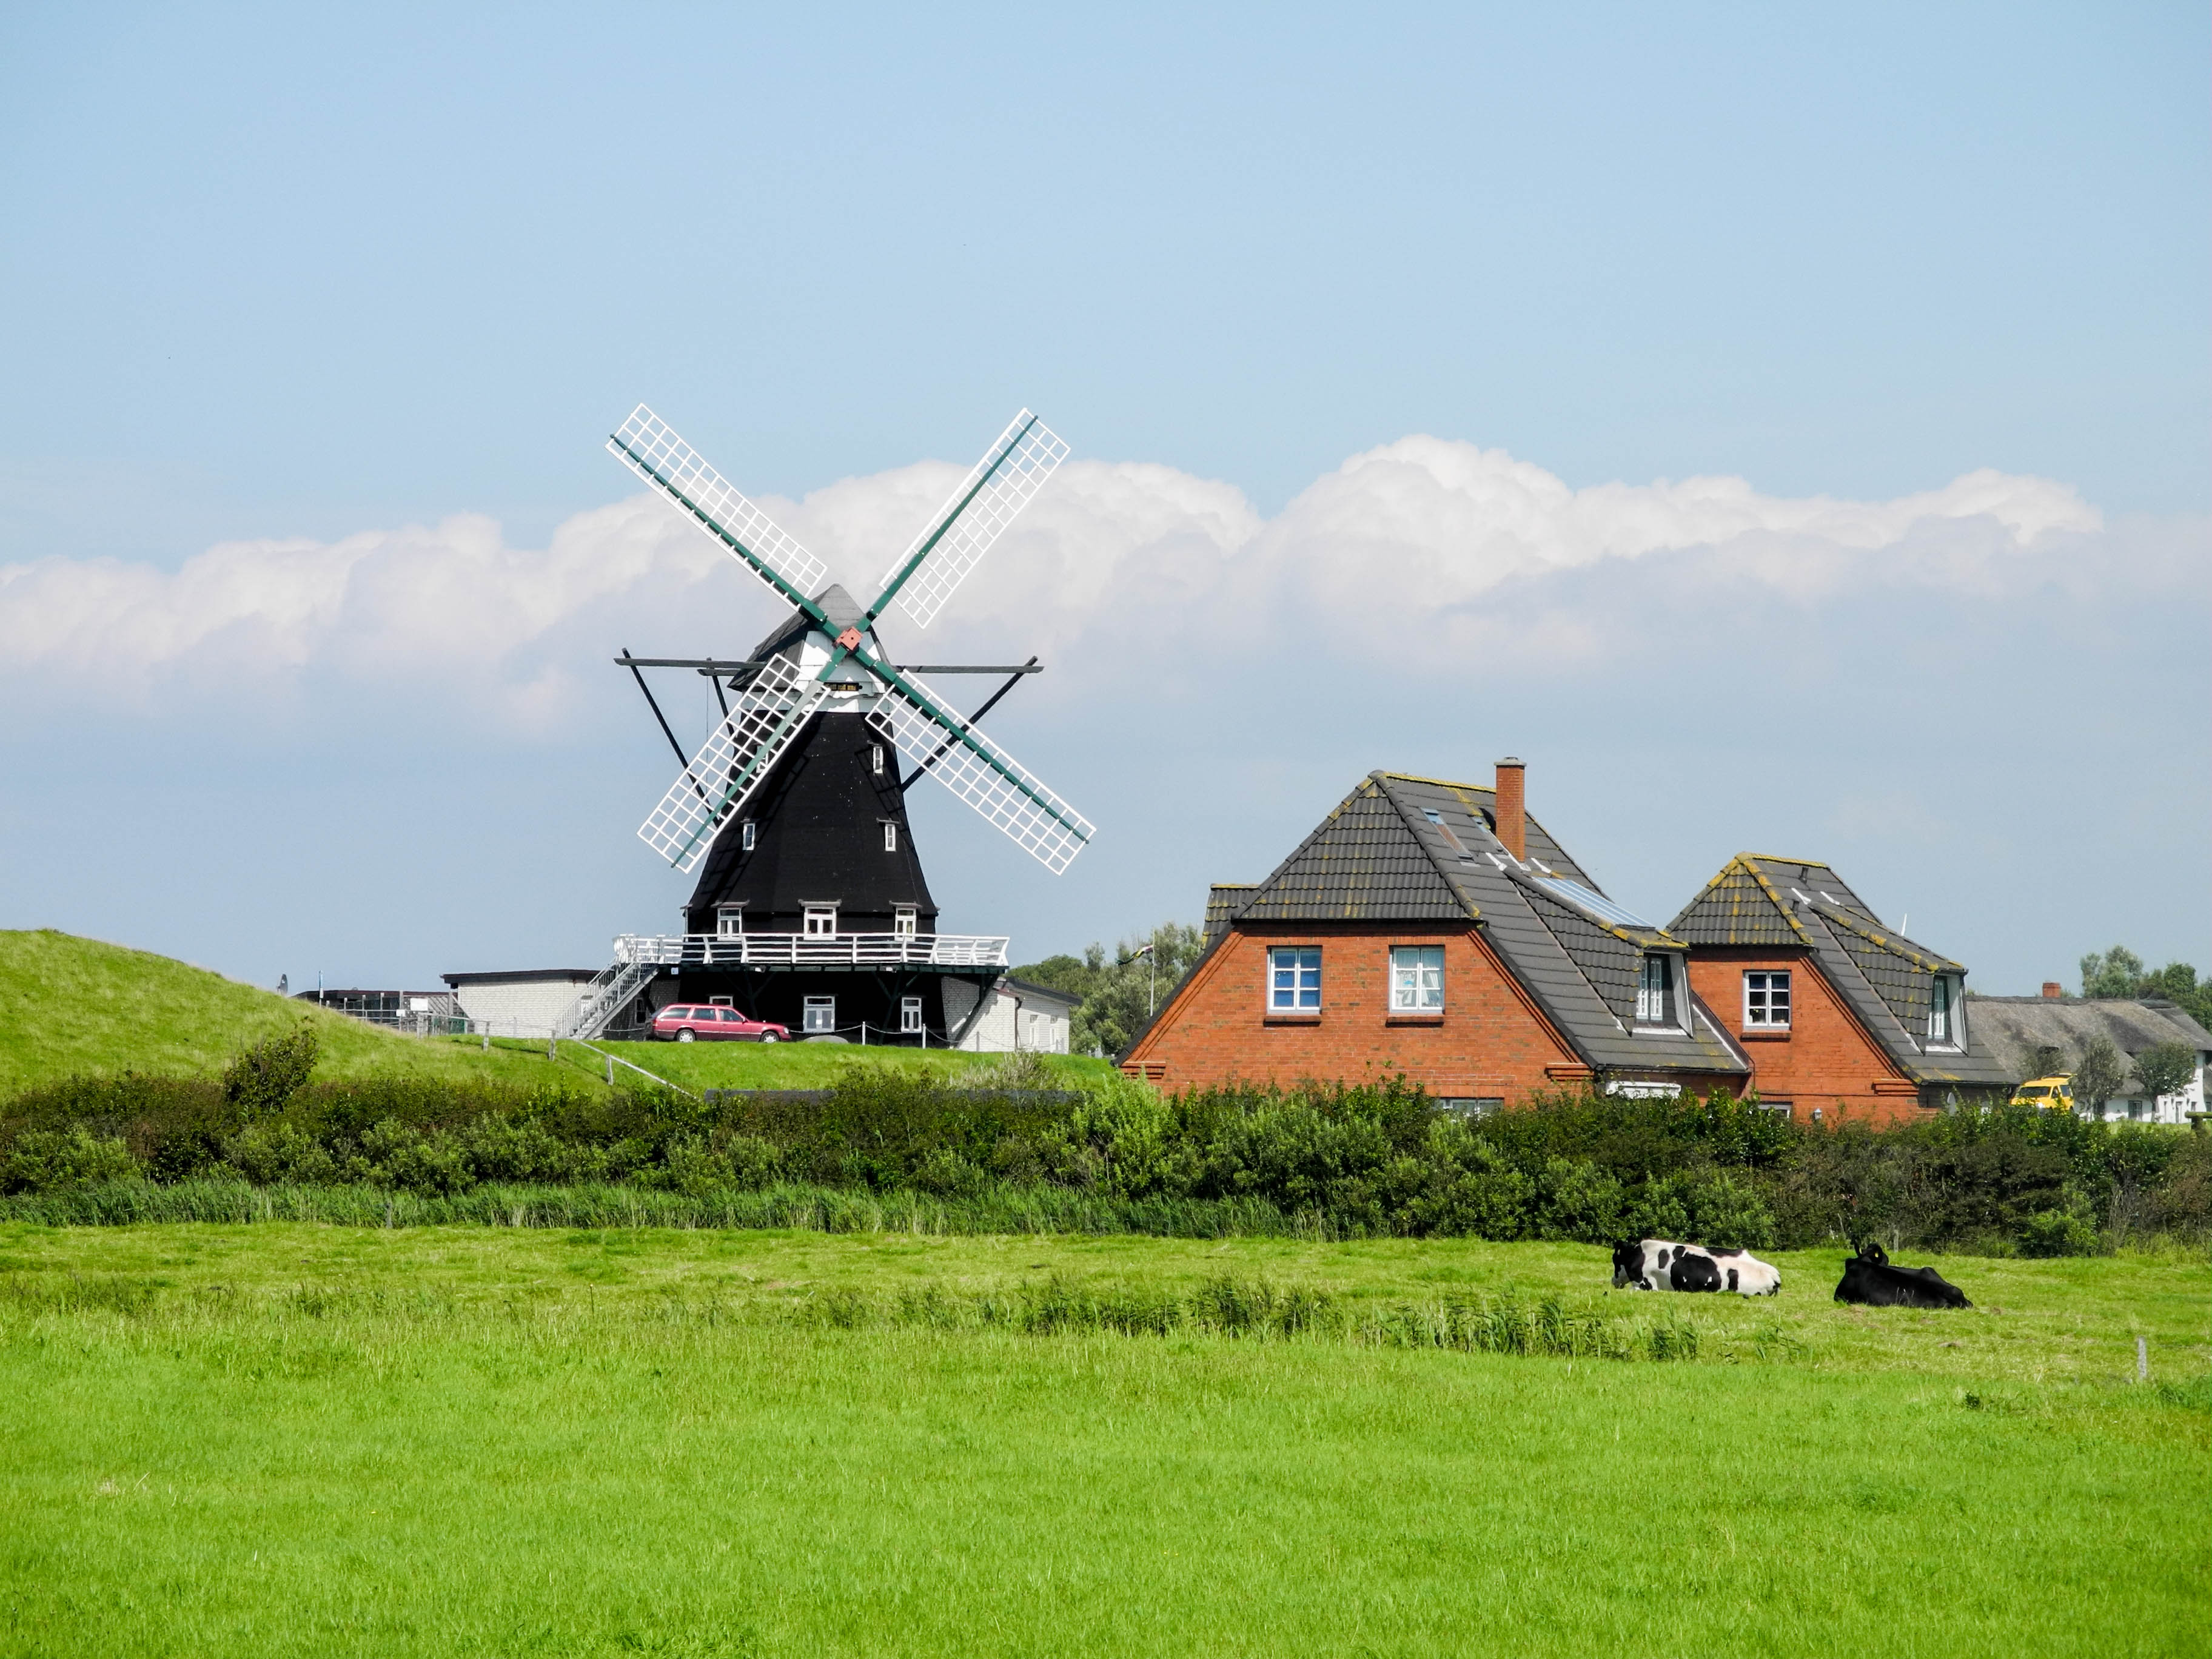 windmill-at-pellworm-germany-istock_24276092_large-2